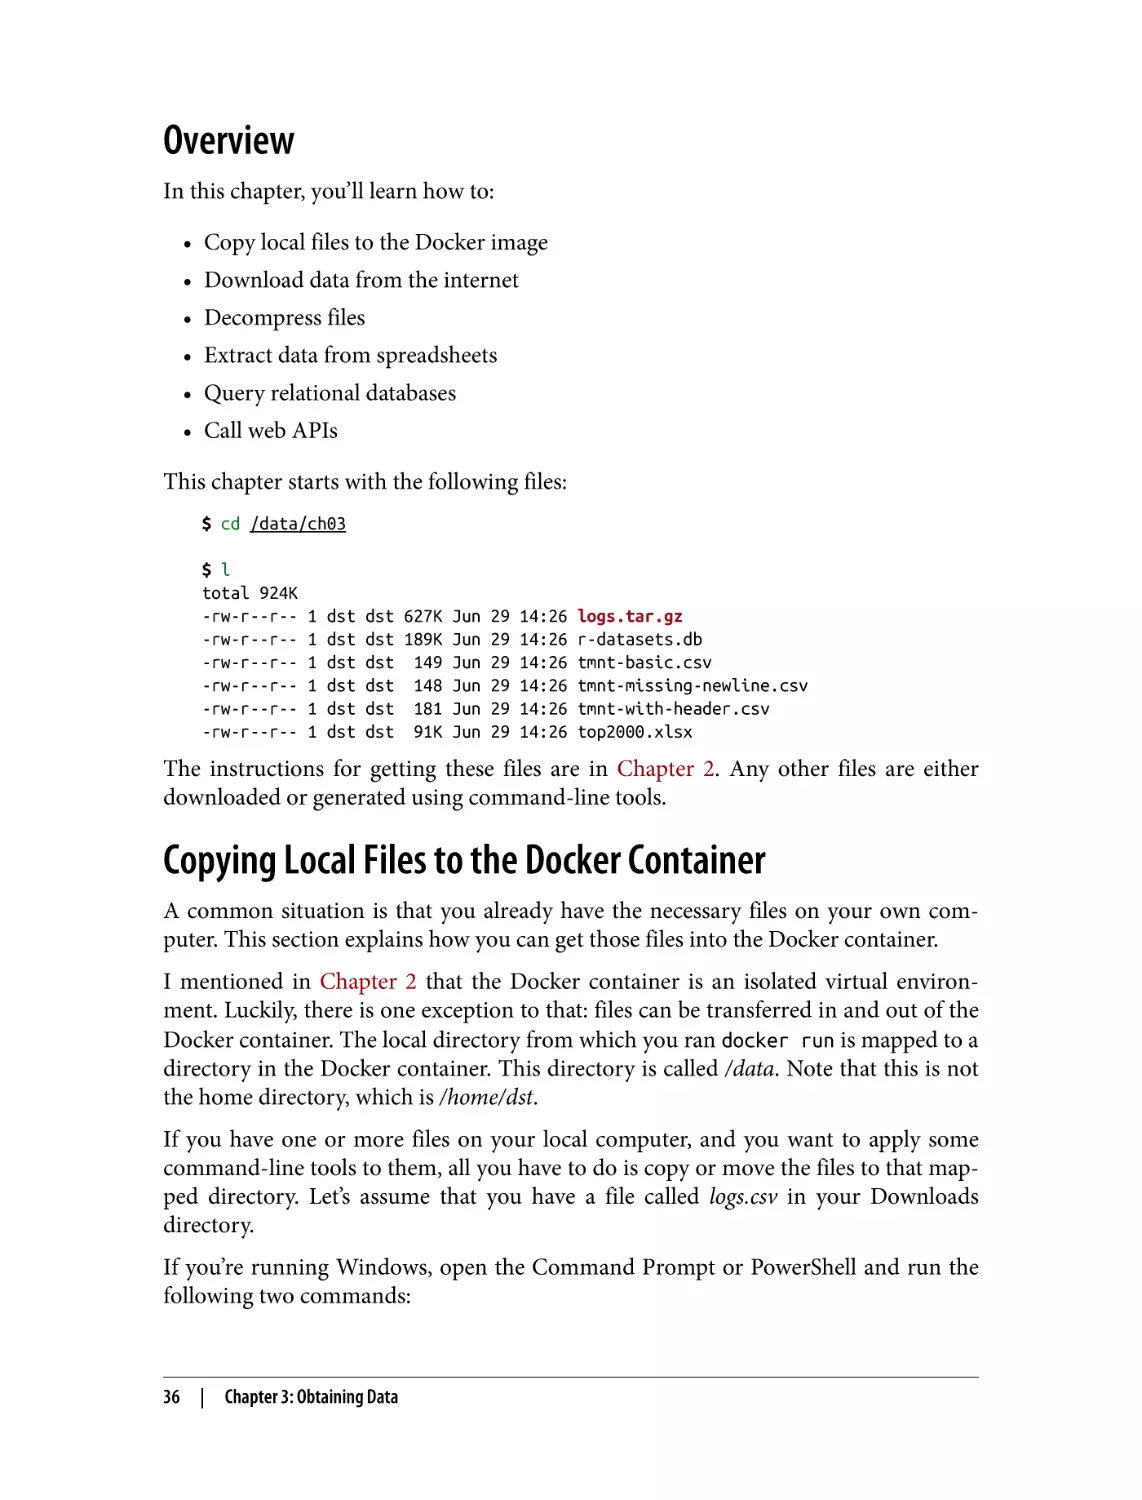 Overview
Copying Local Files to the Docker Container